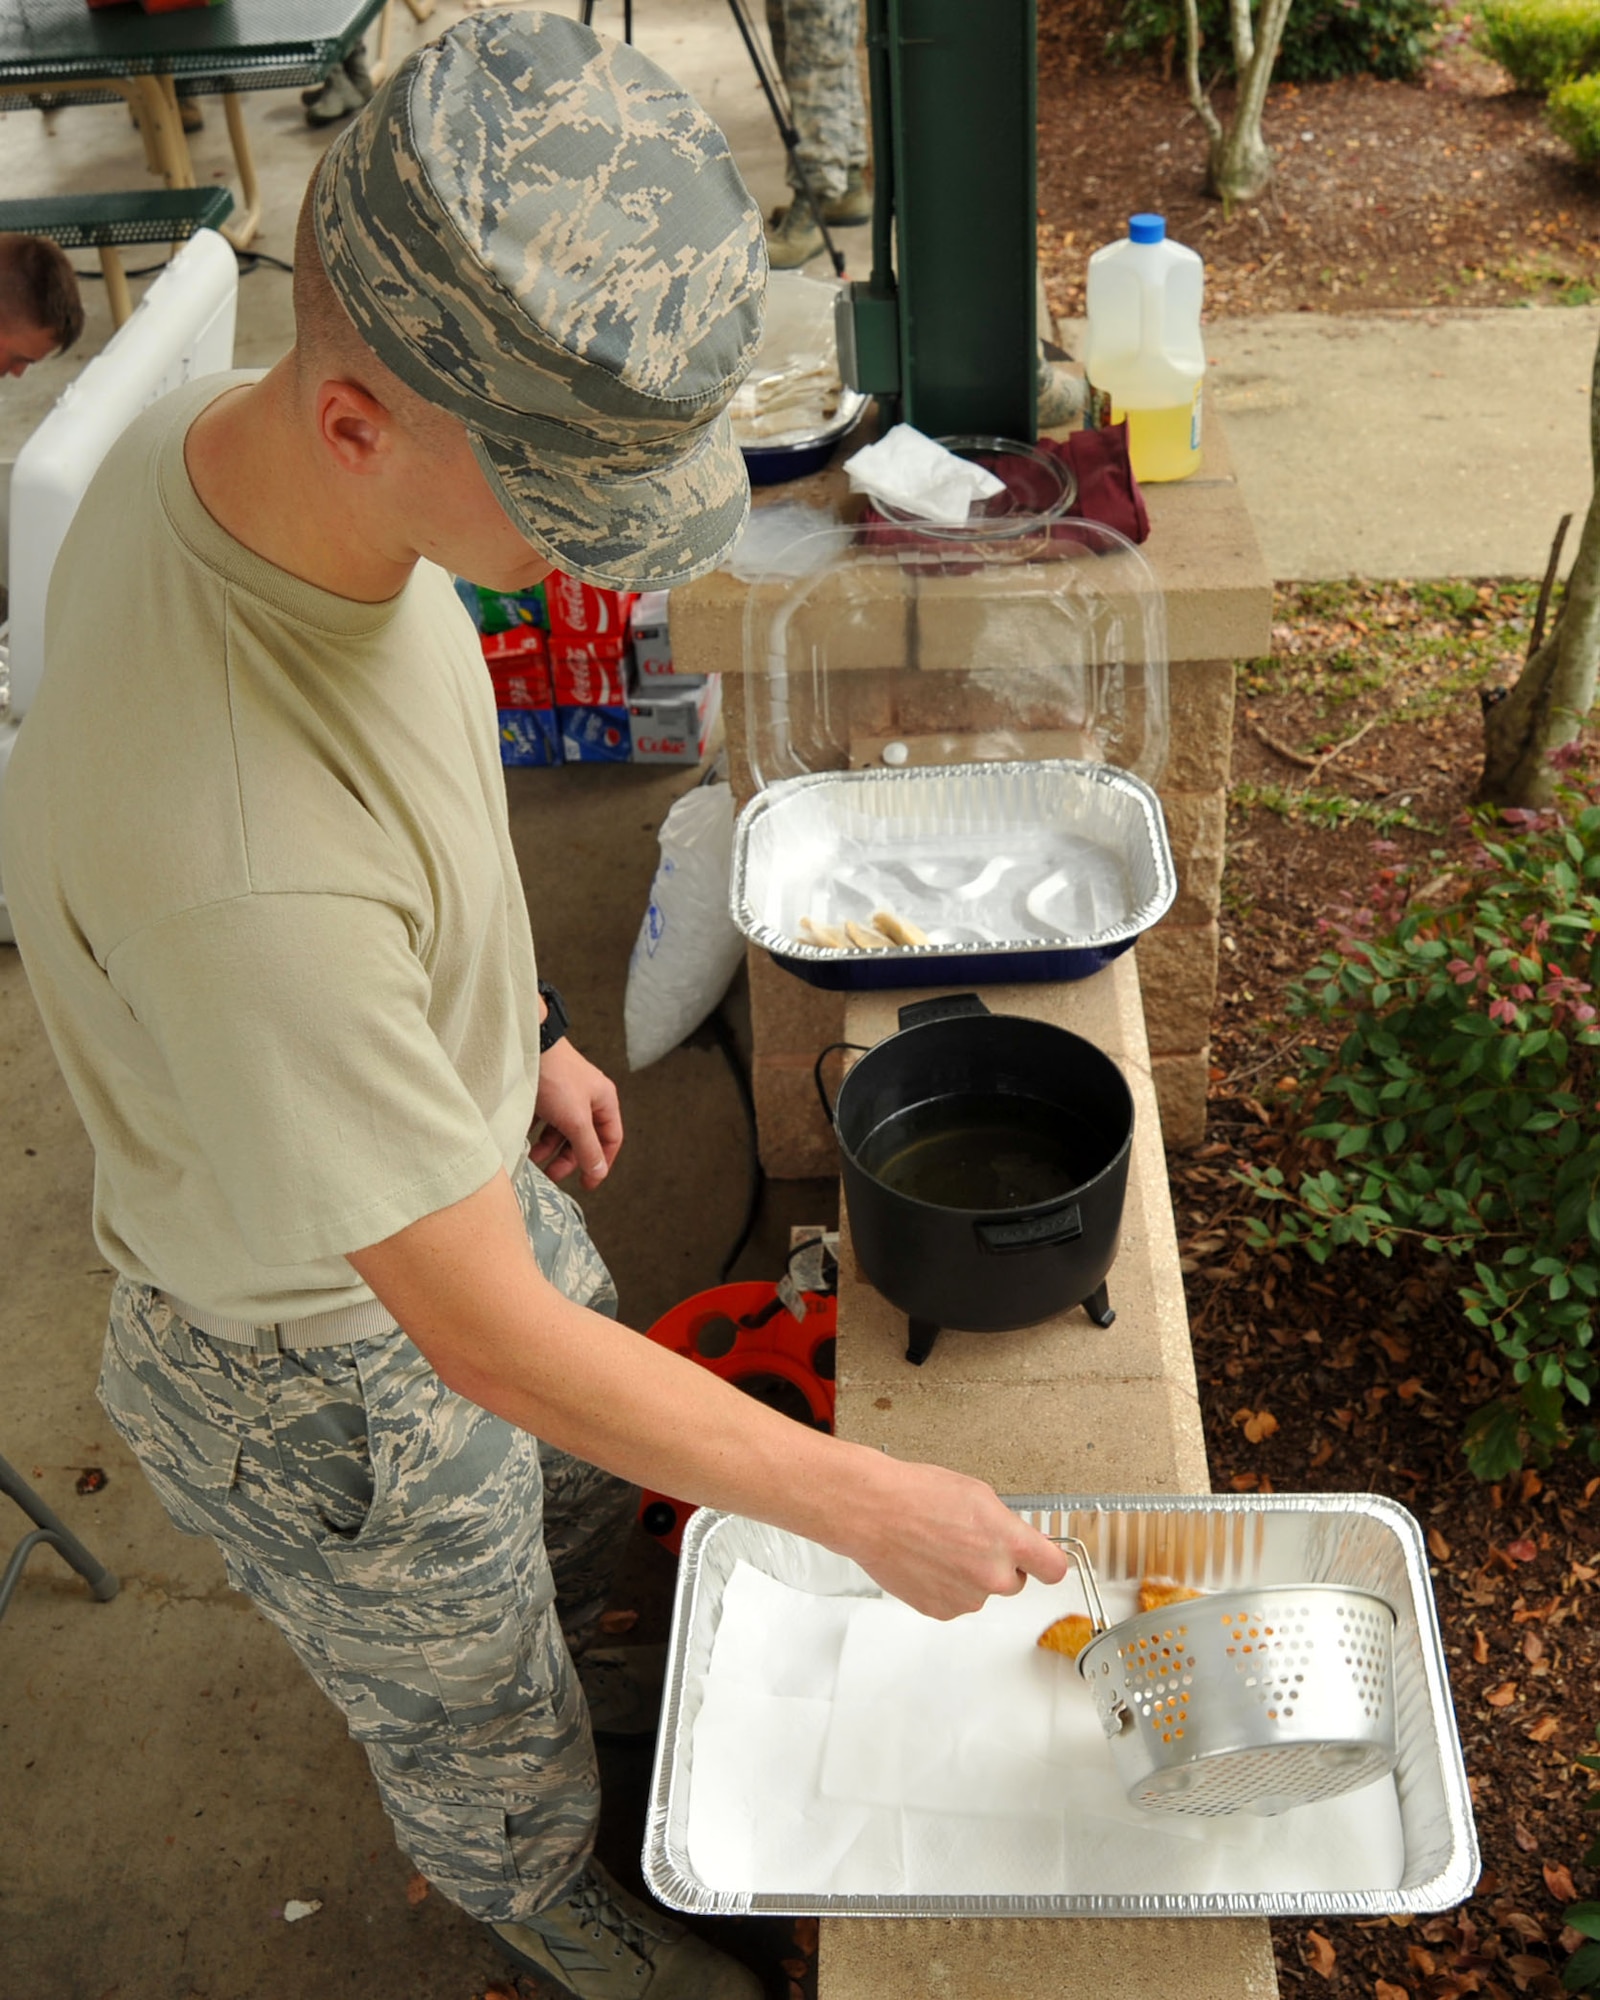 U.S. Air Force Airman Adam O’Donnell, U.S. Air Forces Central Command cyber systems apprentice and event volunteer, prepares empanadas during a Hispanic Heritage Month finale at Shaw Air Force Base, S.C., Oct. 12, 2017.